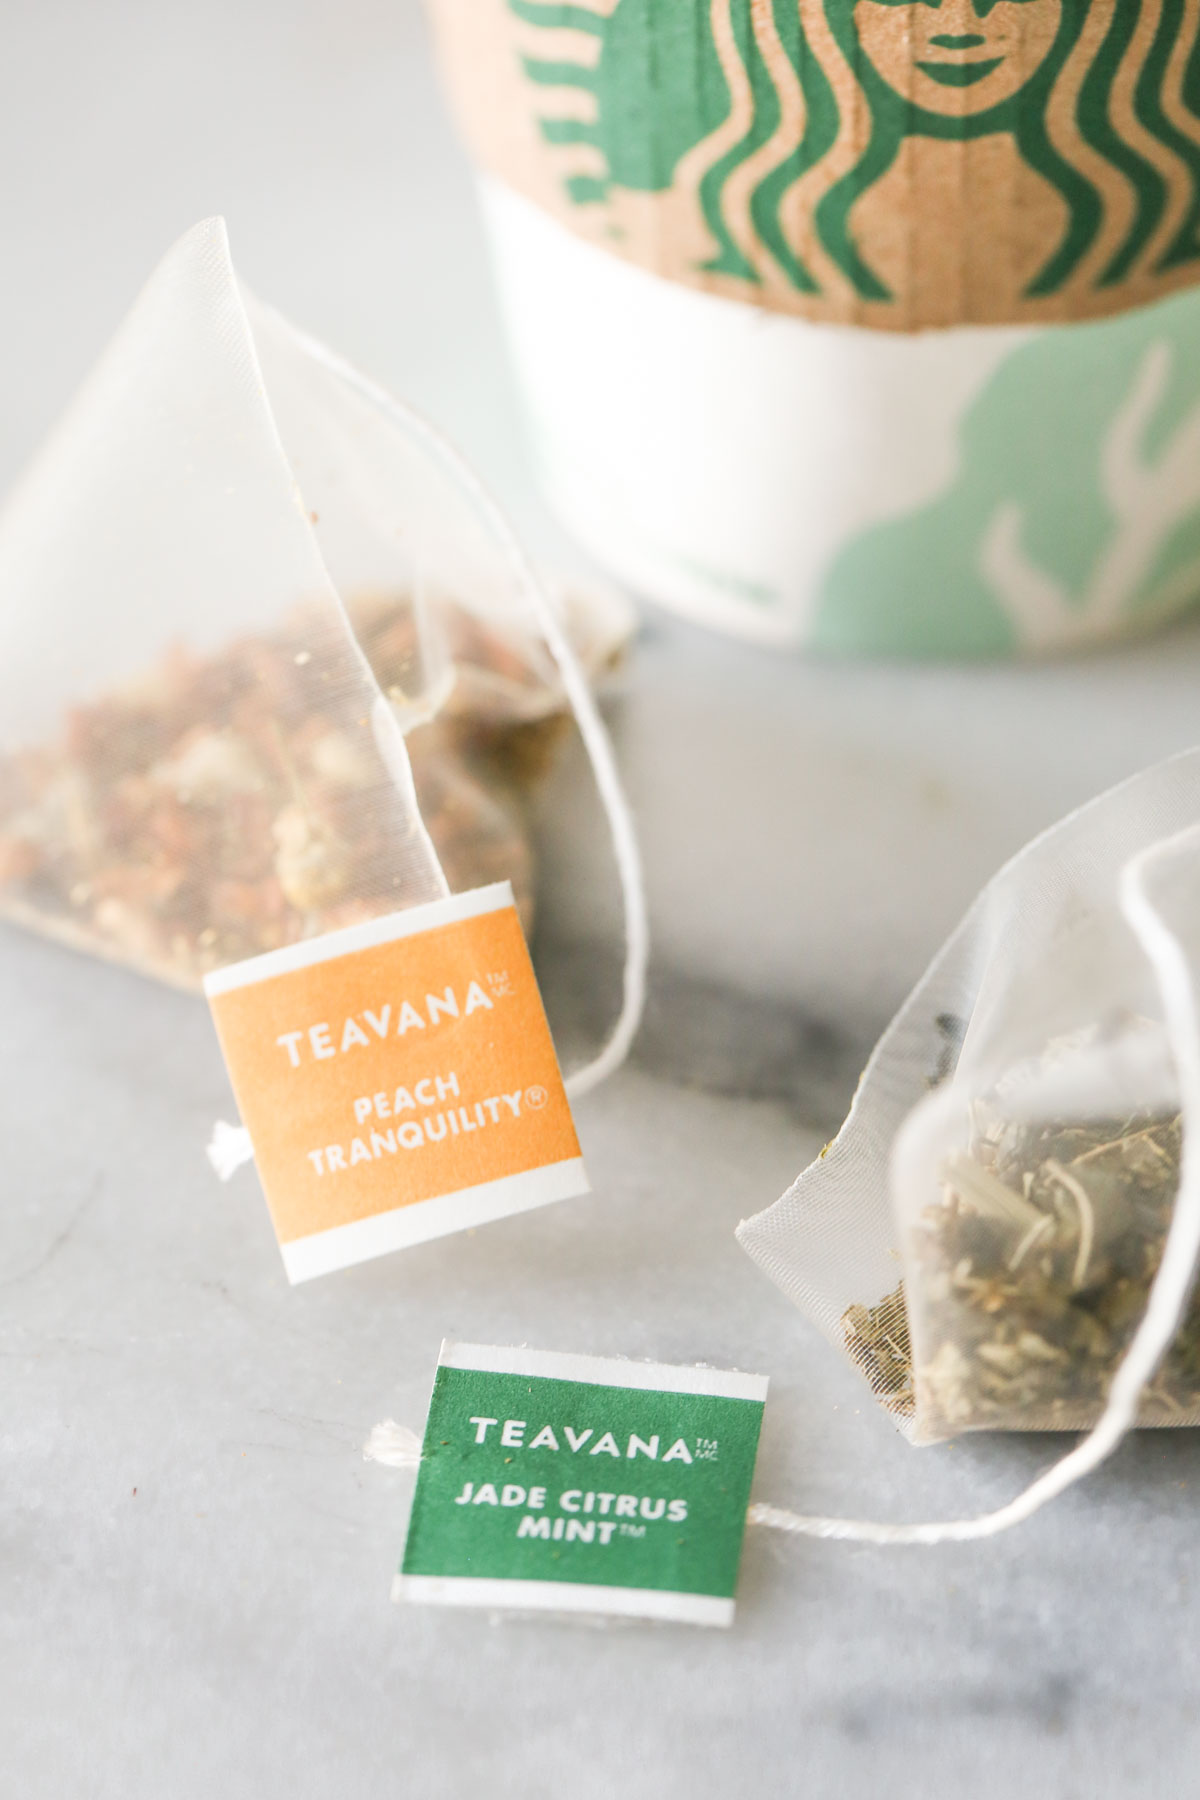 Close-up shot of a Teavana Peach Tranquility tea pack next to a Teavana Jade Citrus Mint tea pack, with a Starbucks cup in the background.